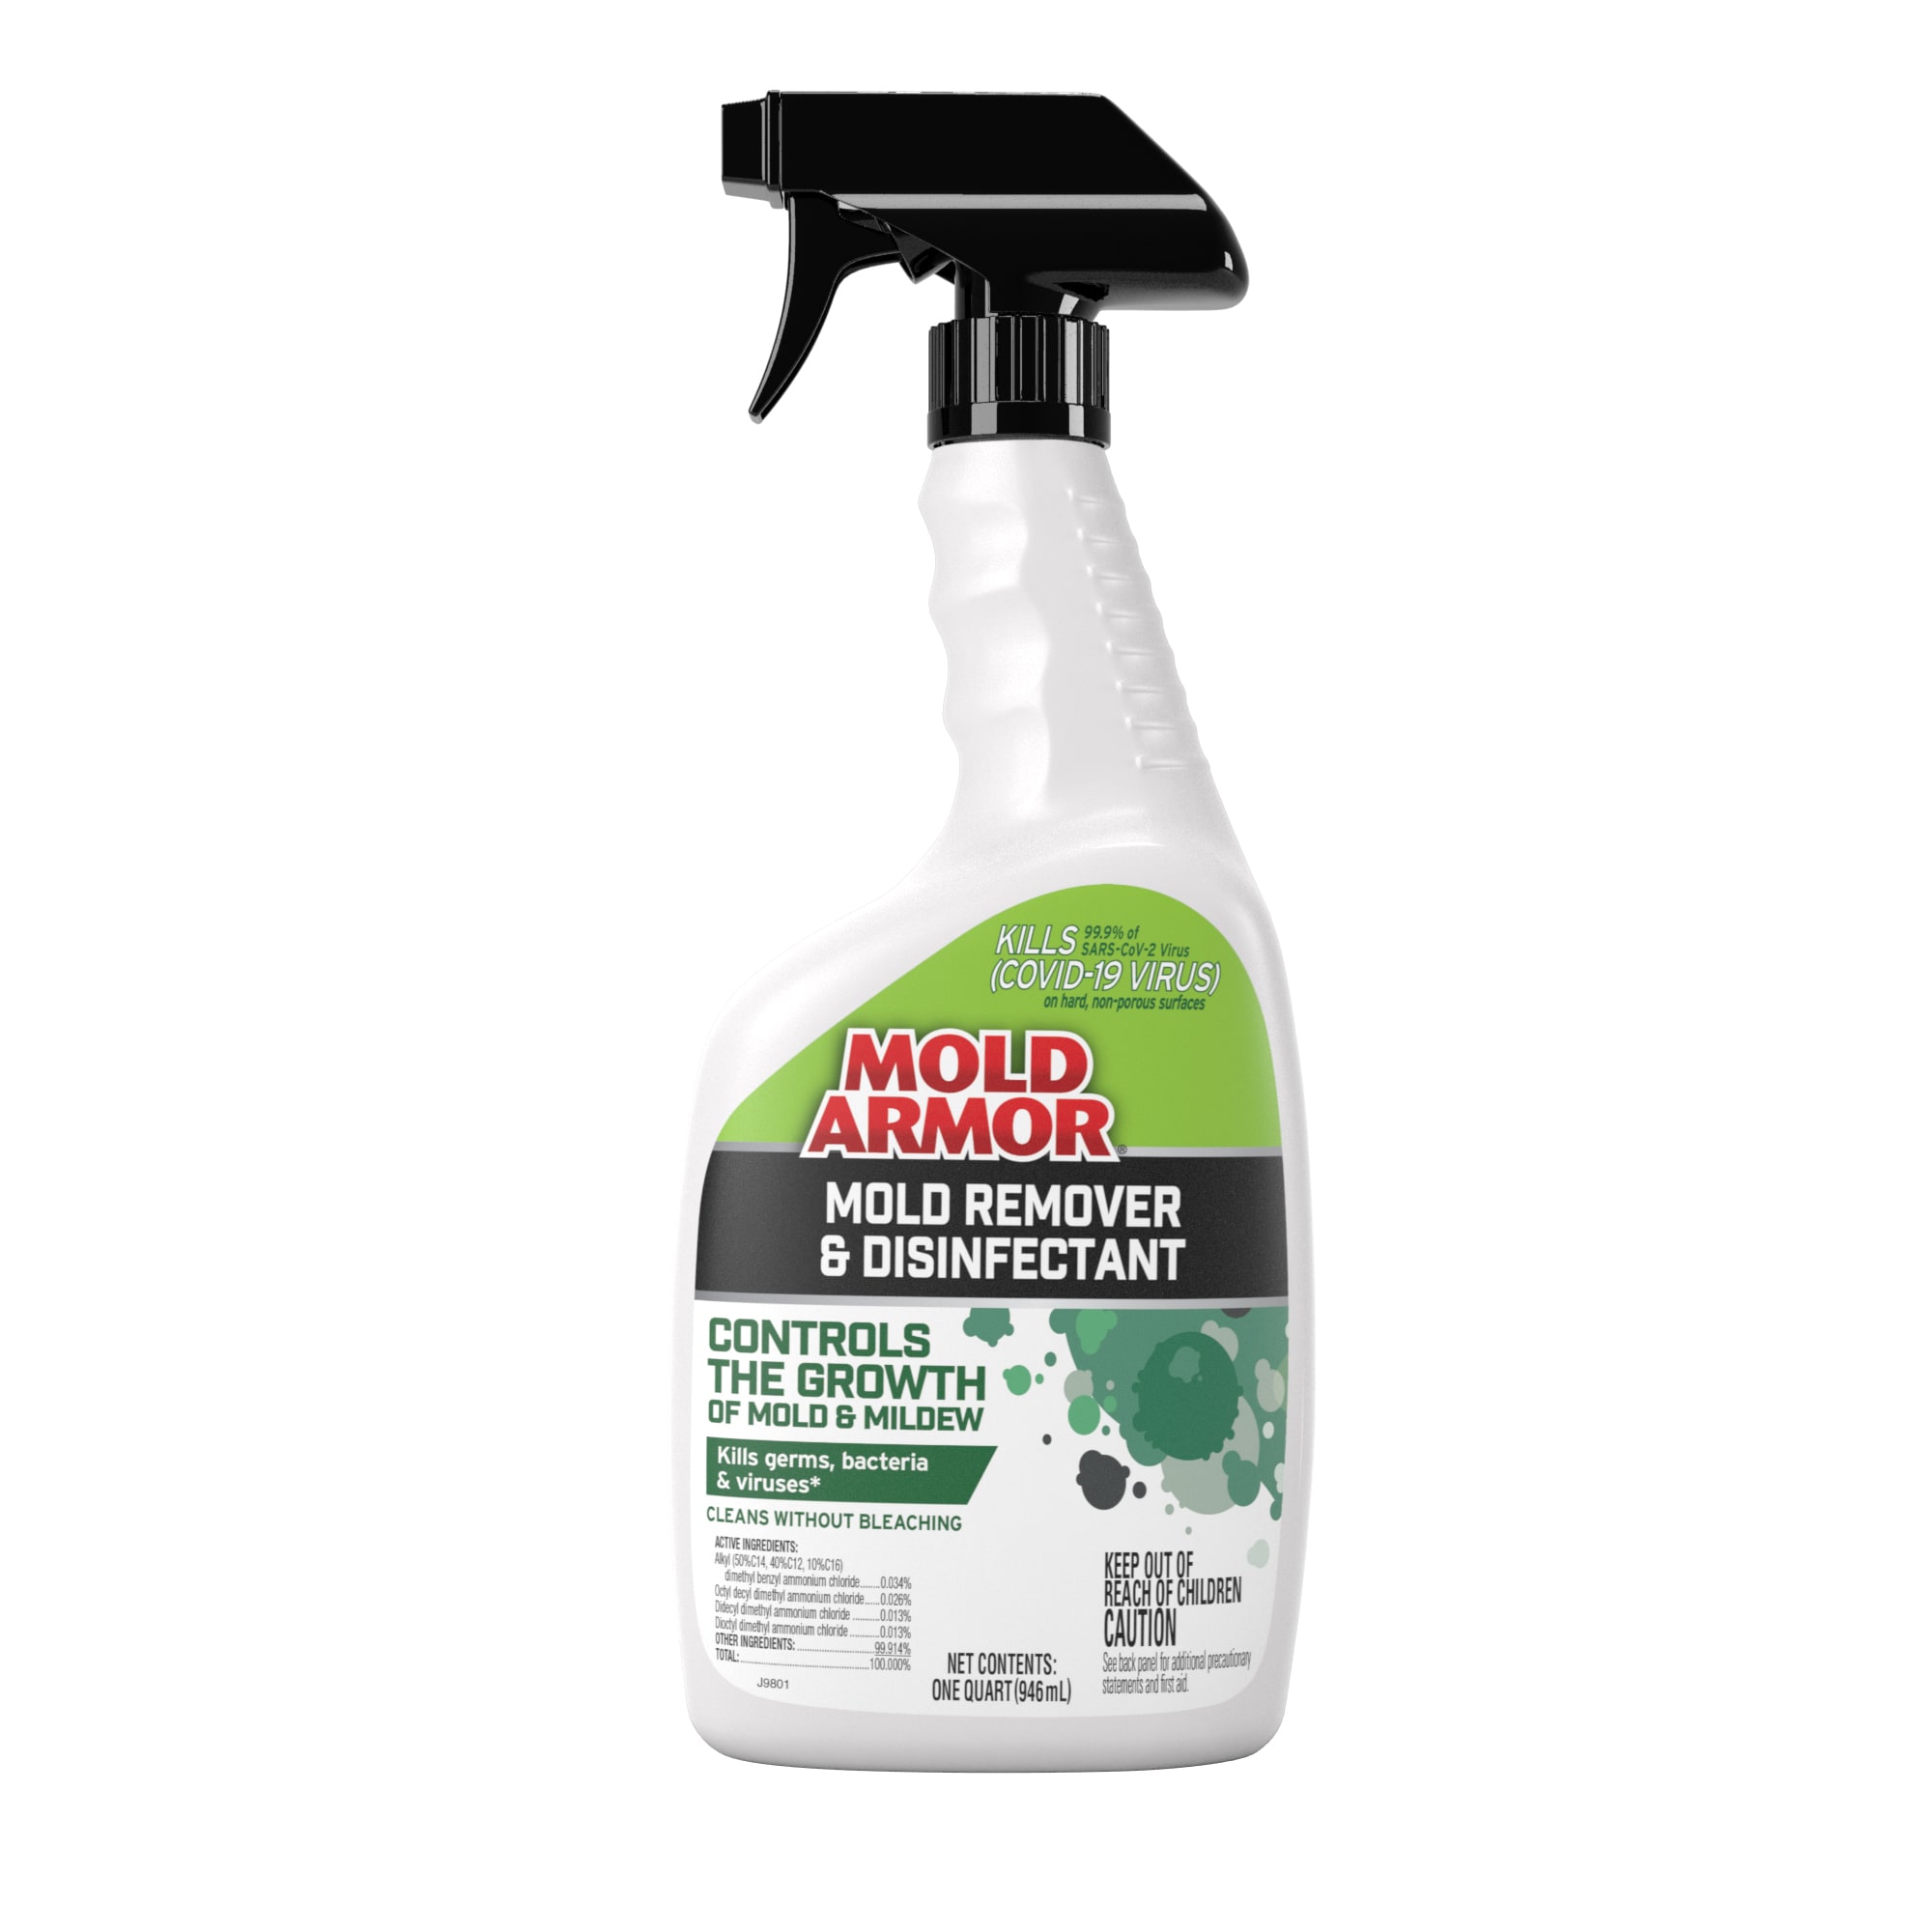 How to Use GLASSGUARD Miracle Mould Removal Gel - Eliminate Mould Stains &  Restore Surfaces 